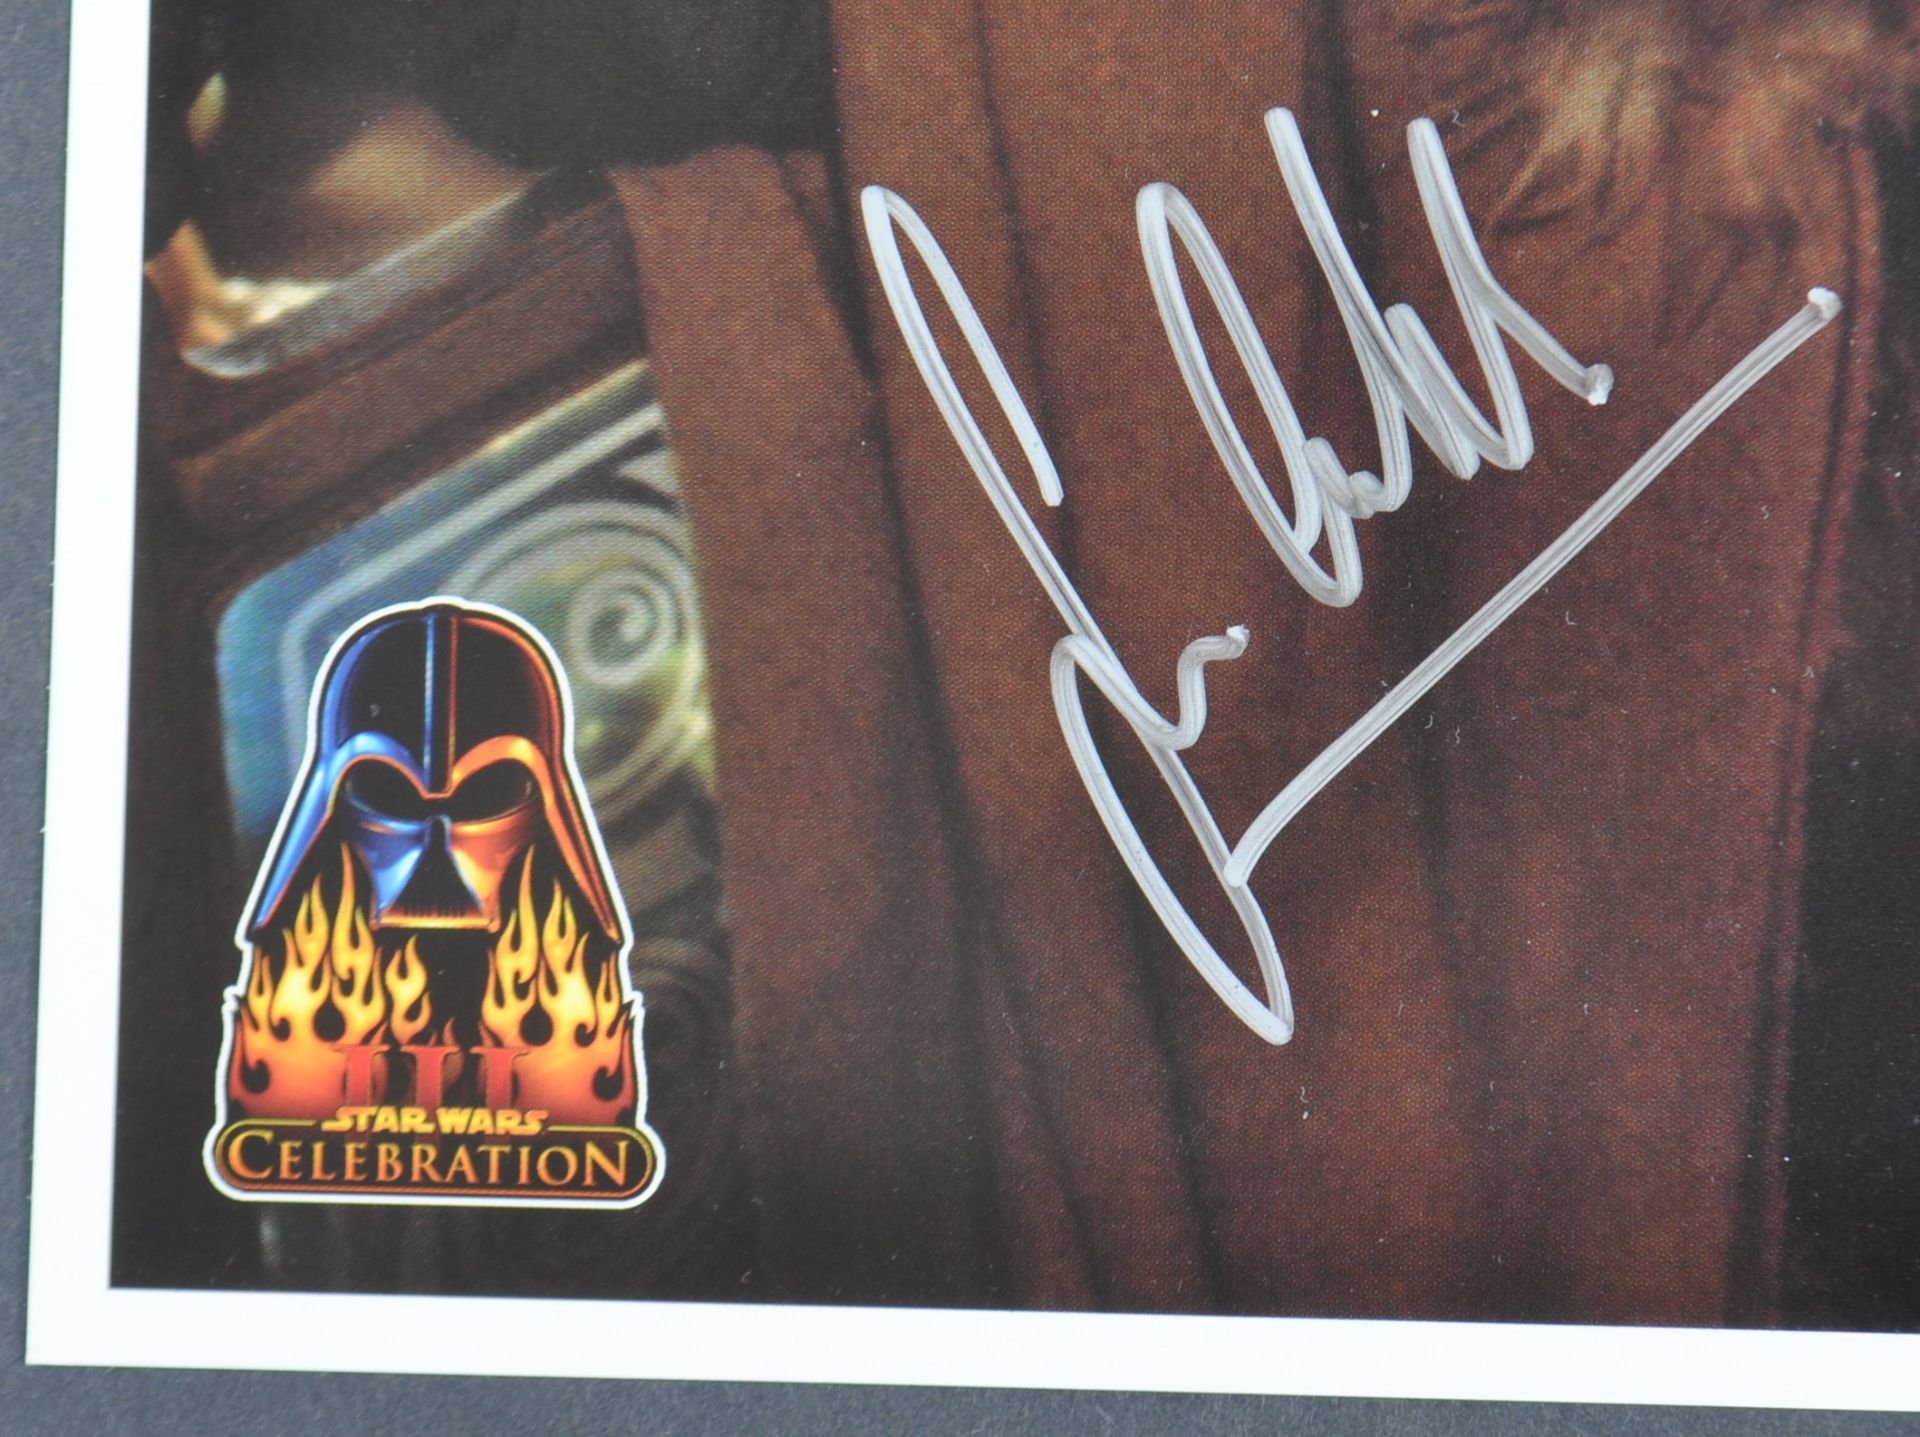 ESTATE OF DAVE PROWSE – STAR WARS OFFICIAL PIX CELEBRATION III SIGNED PHOTO - Image 2 of 3